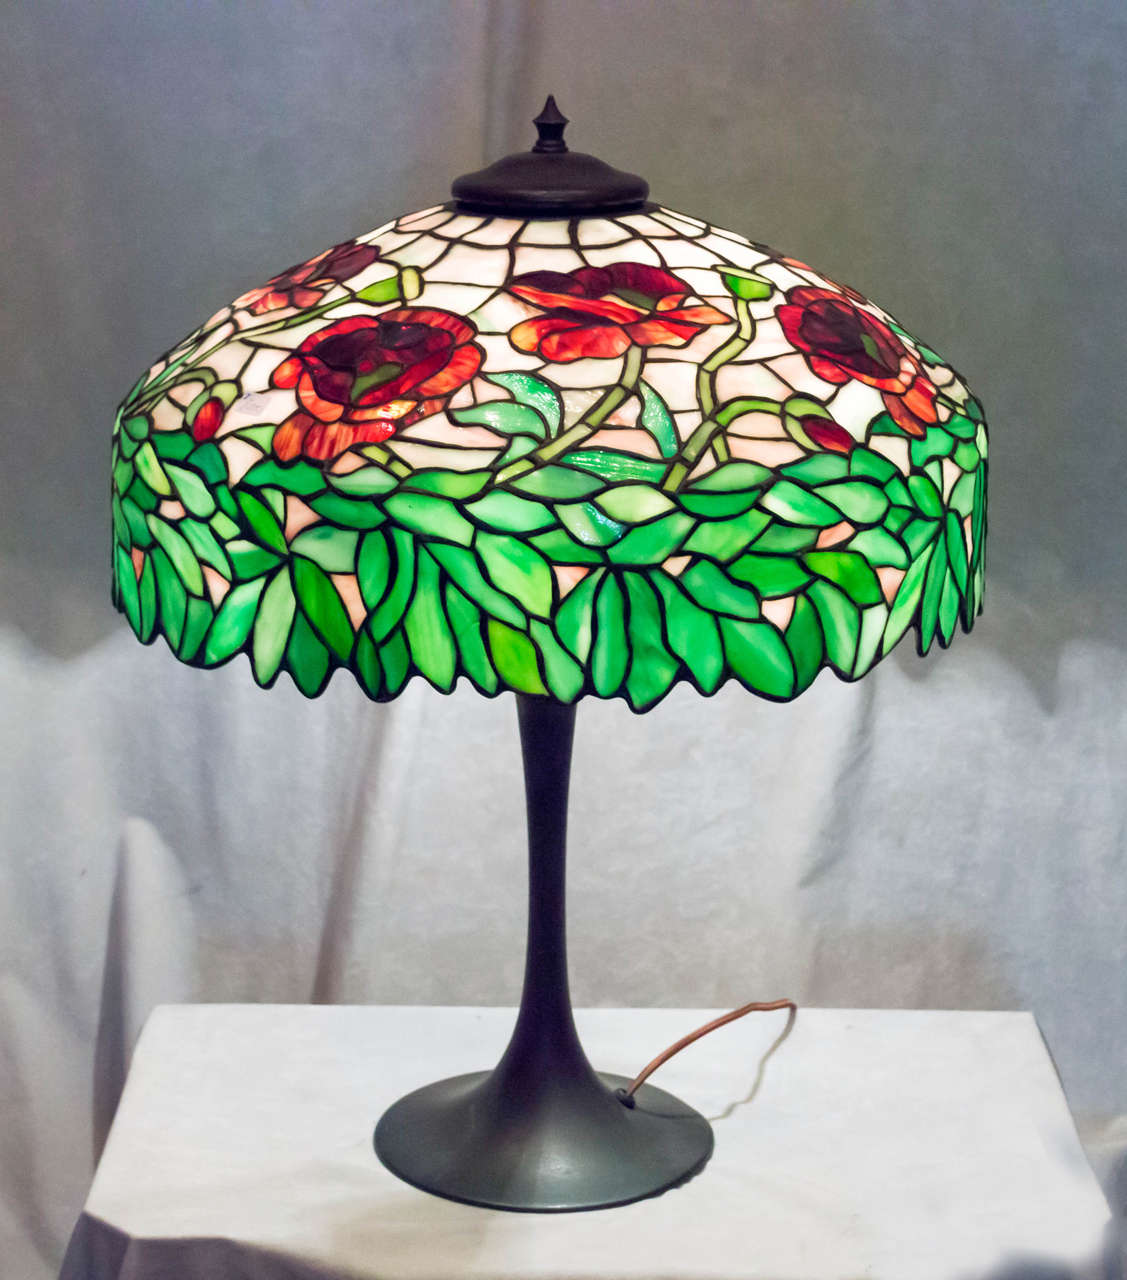 This very colorful leaded glass table lamp is attributed to the 